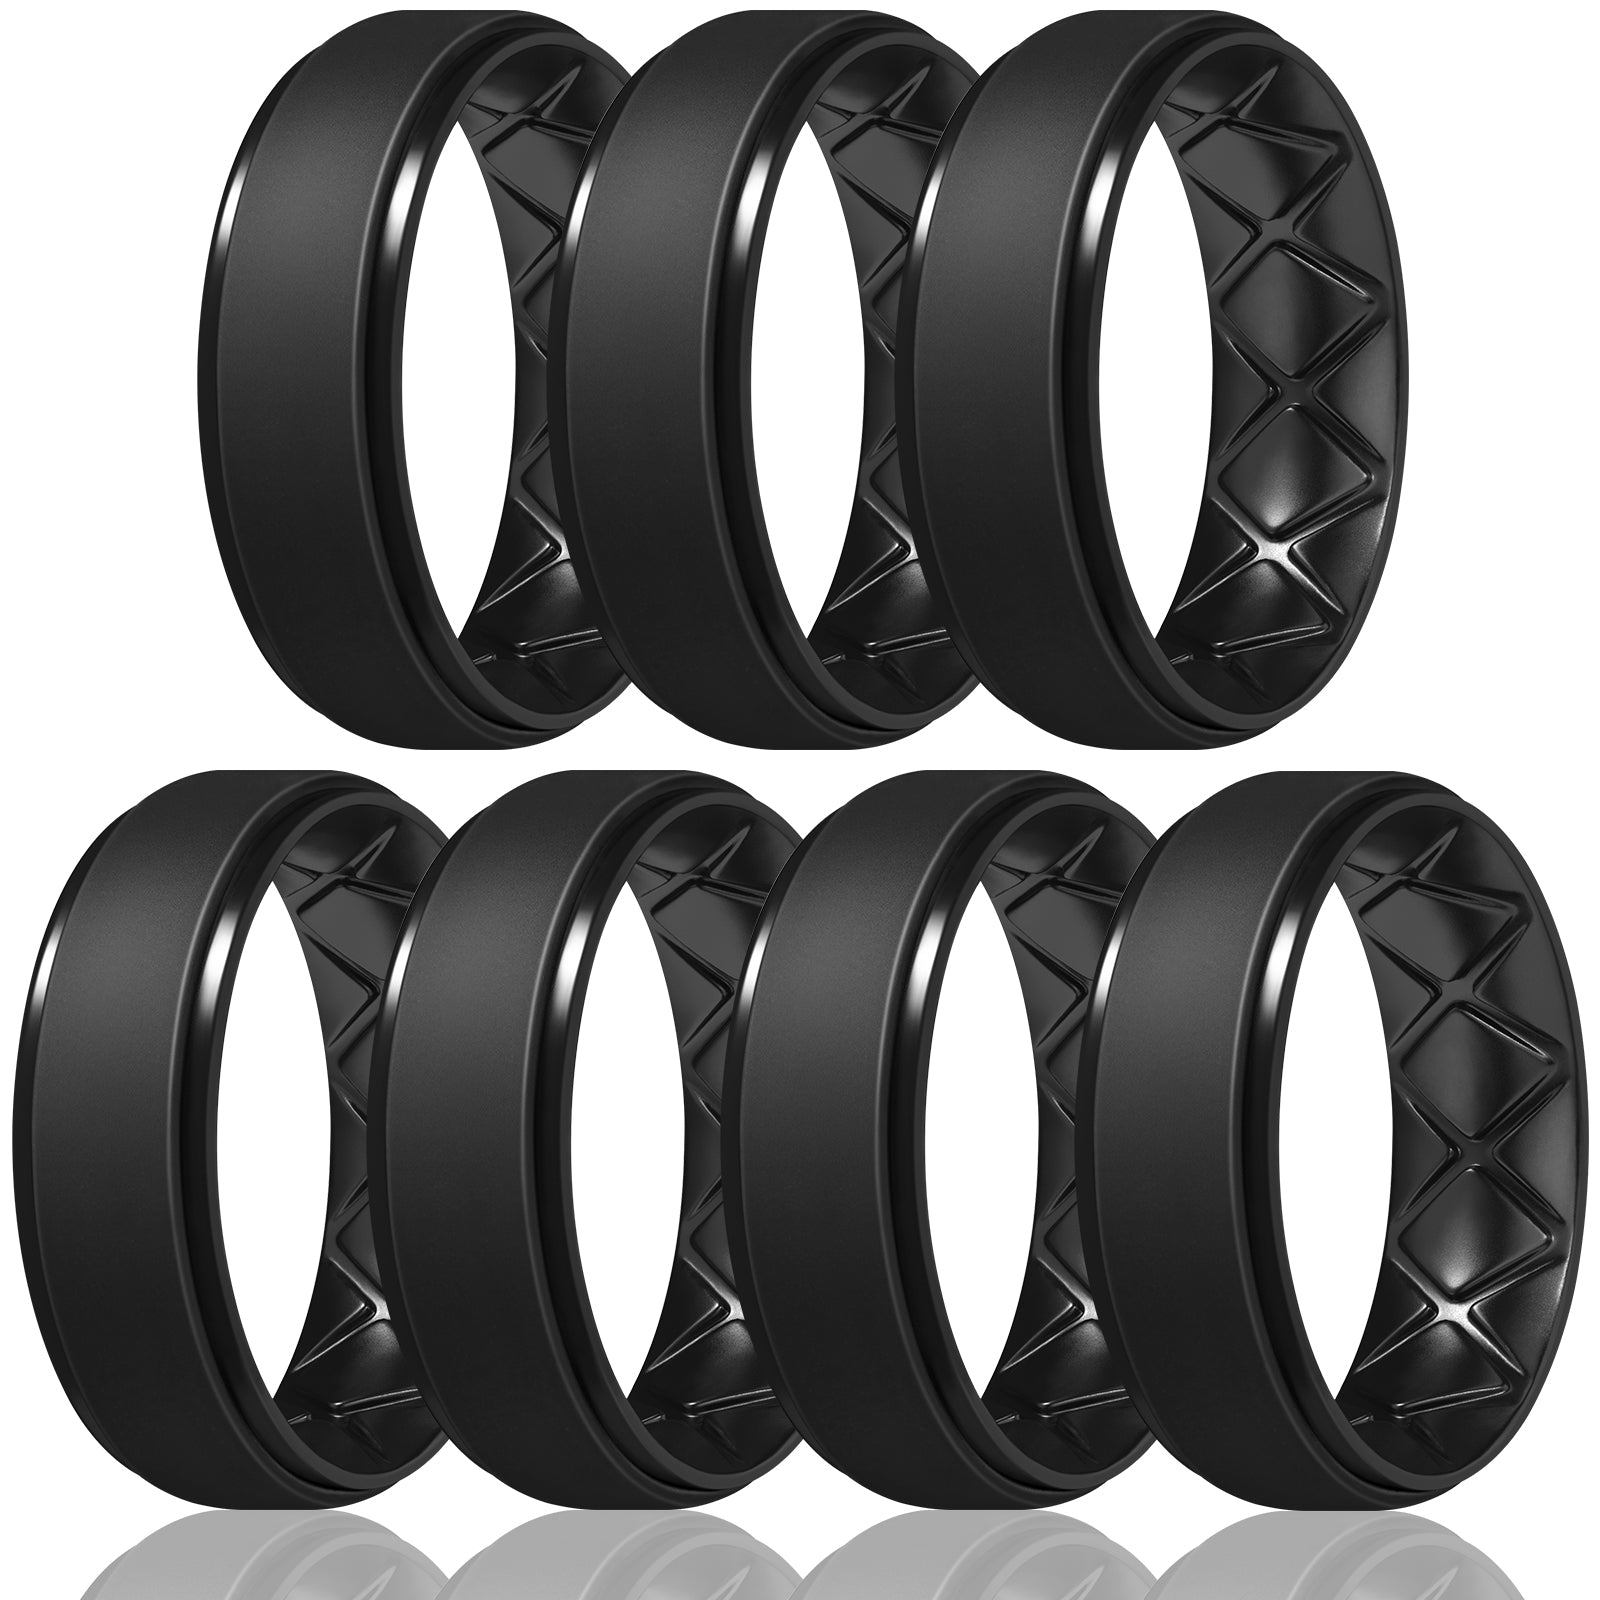  Egnaro Inner Arc Ergonomic Breathable Design, Silicone Rings  for Women with Half Sizes, Women's Silicone Wedding Band, 6mm Wide - 2mm  Thick : Clothing, Shoes & Jewelry